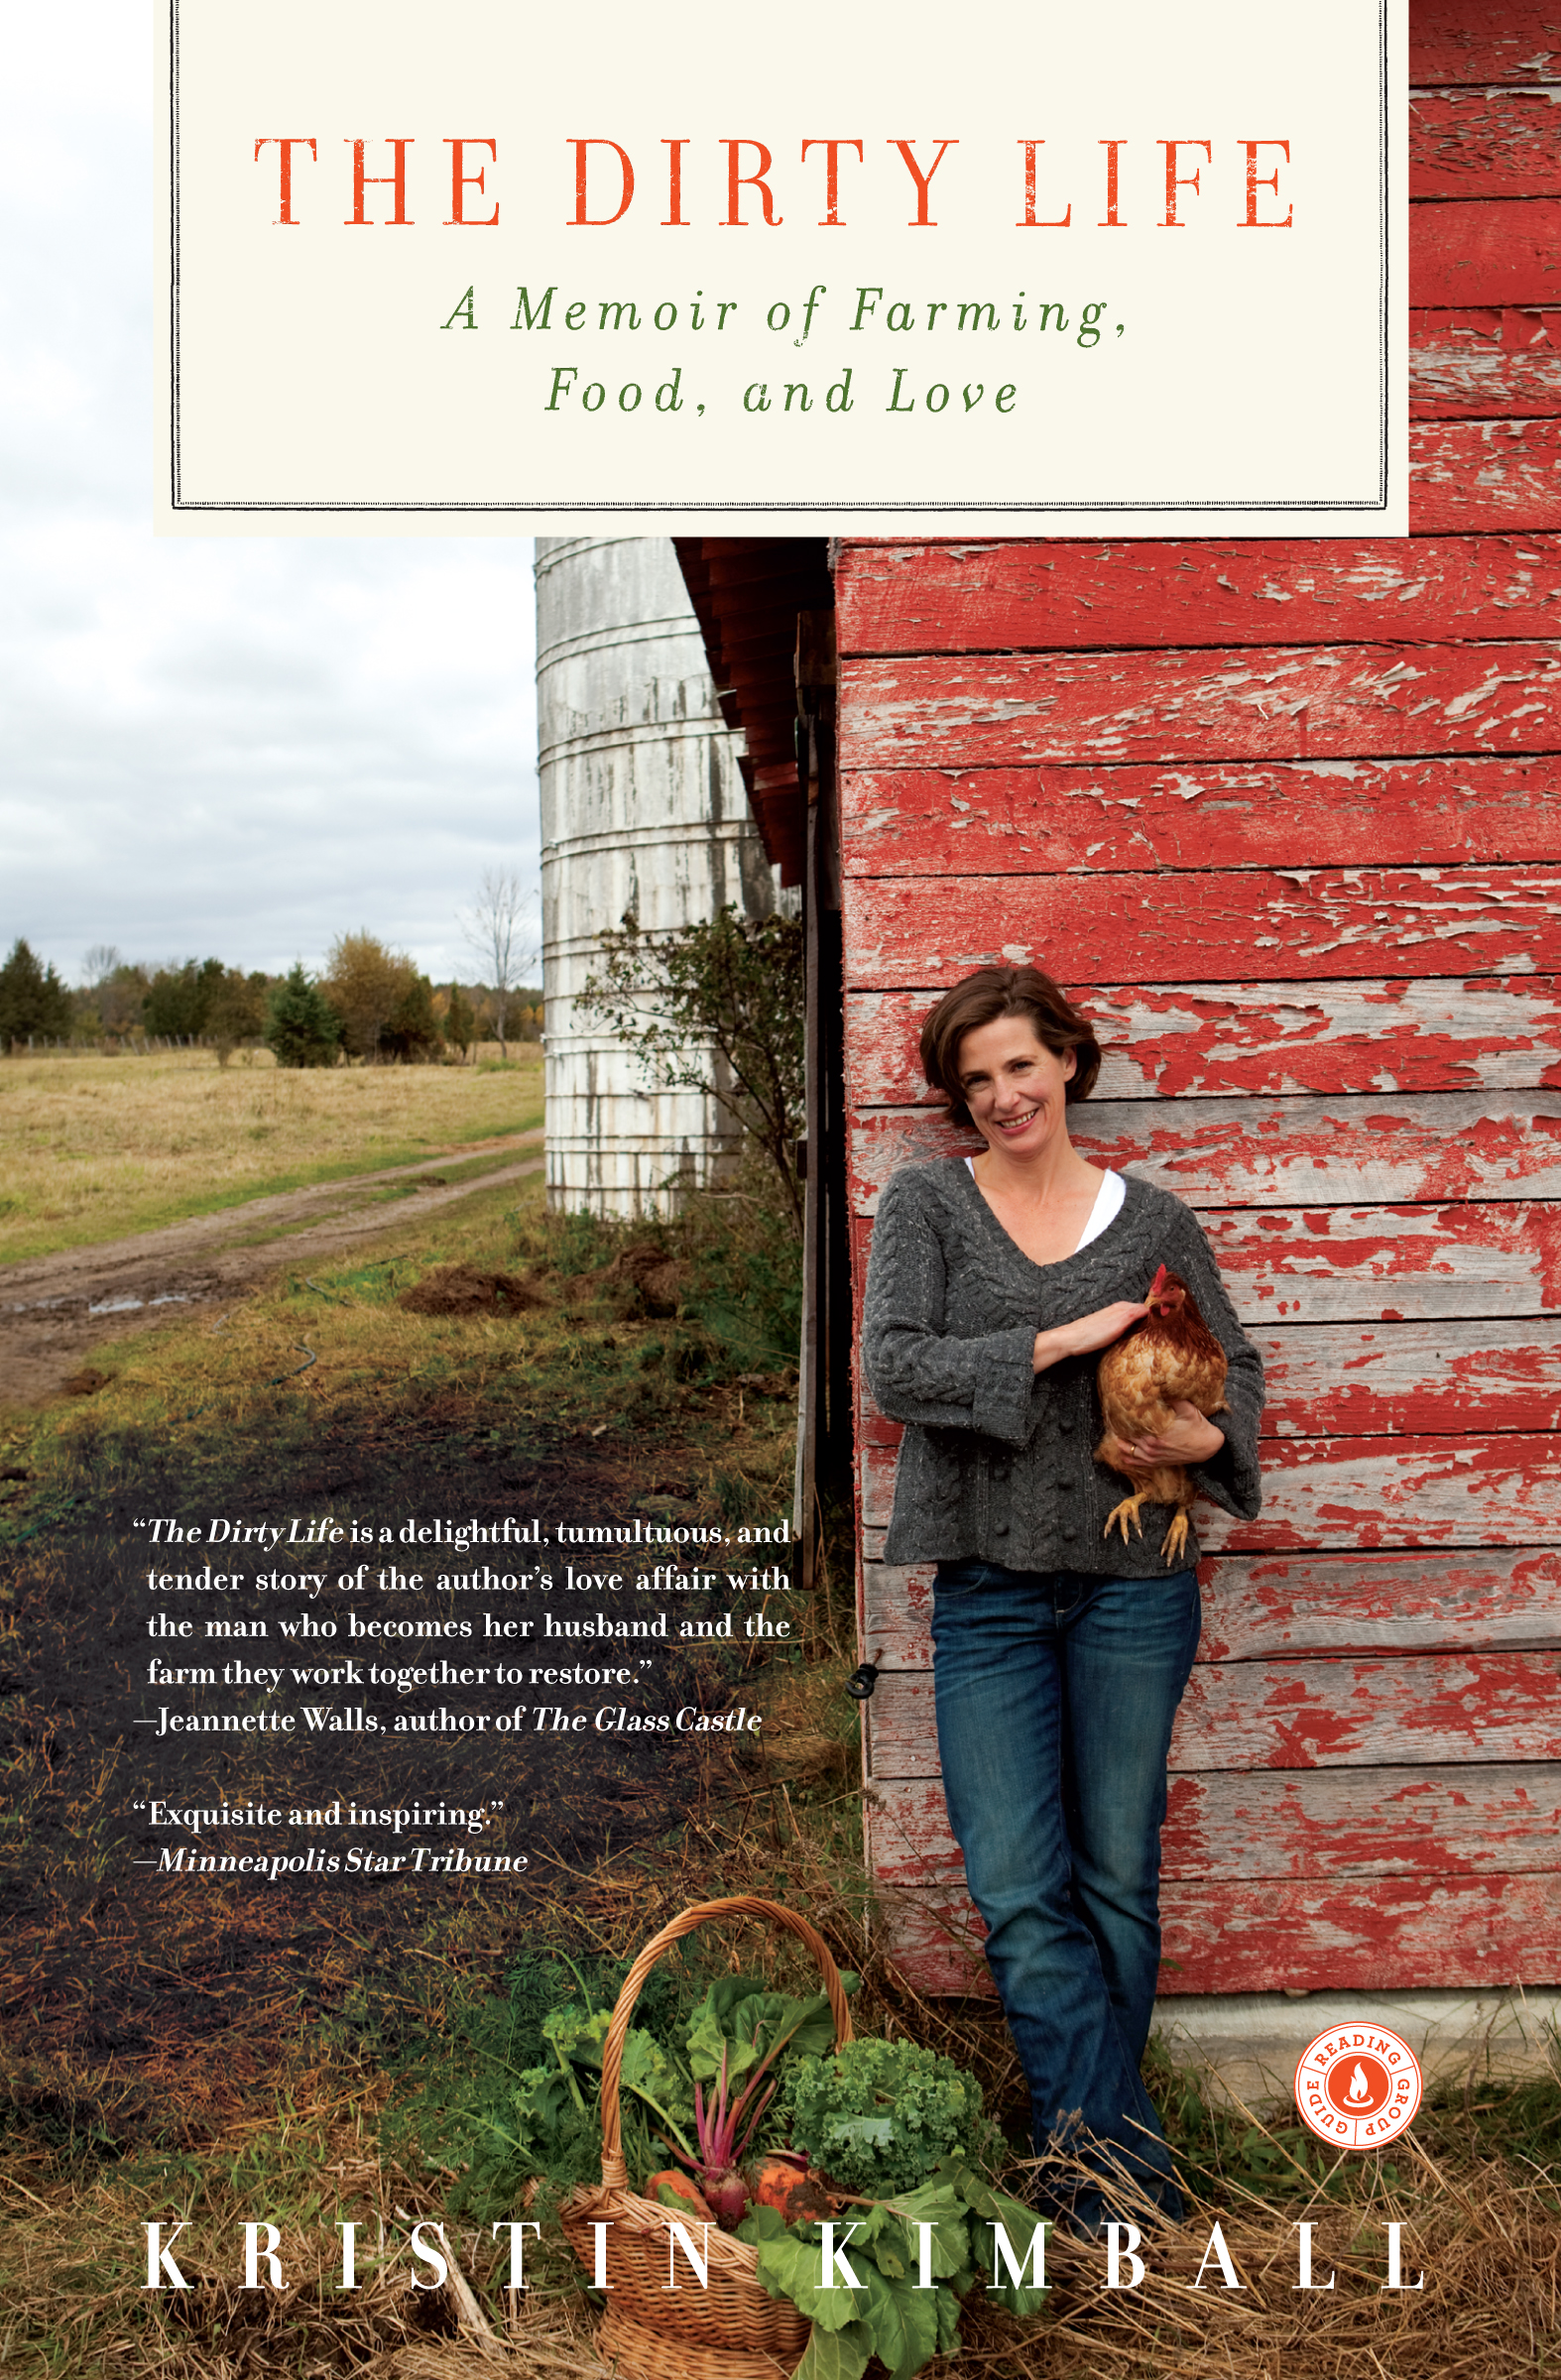 The Dirty Life: A Memoir of Farming, Food, and Love